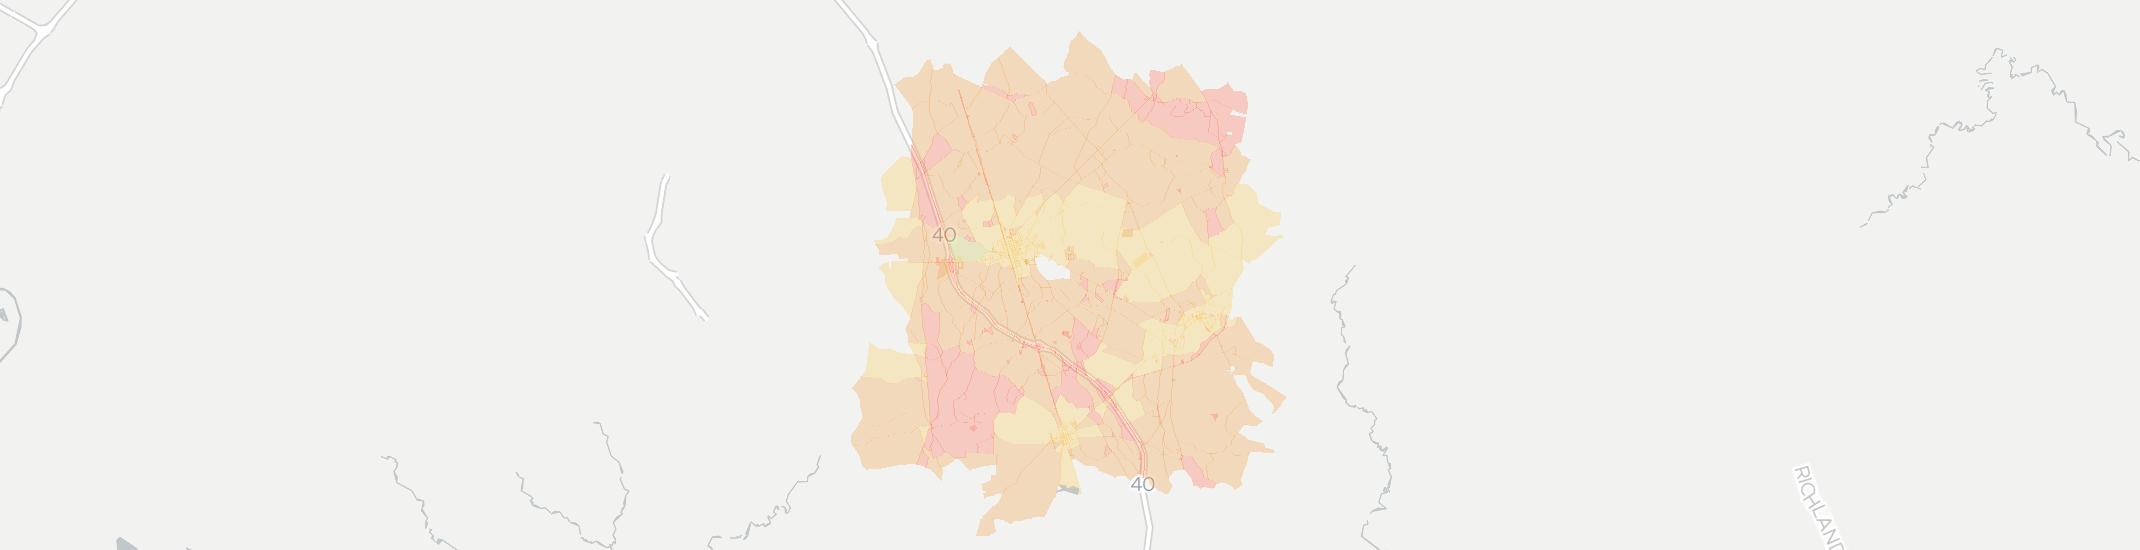 Warsaw Internet Competition Map. Click for interactive map